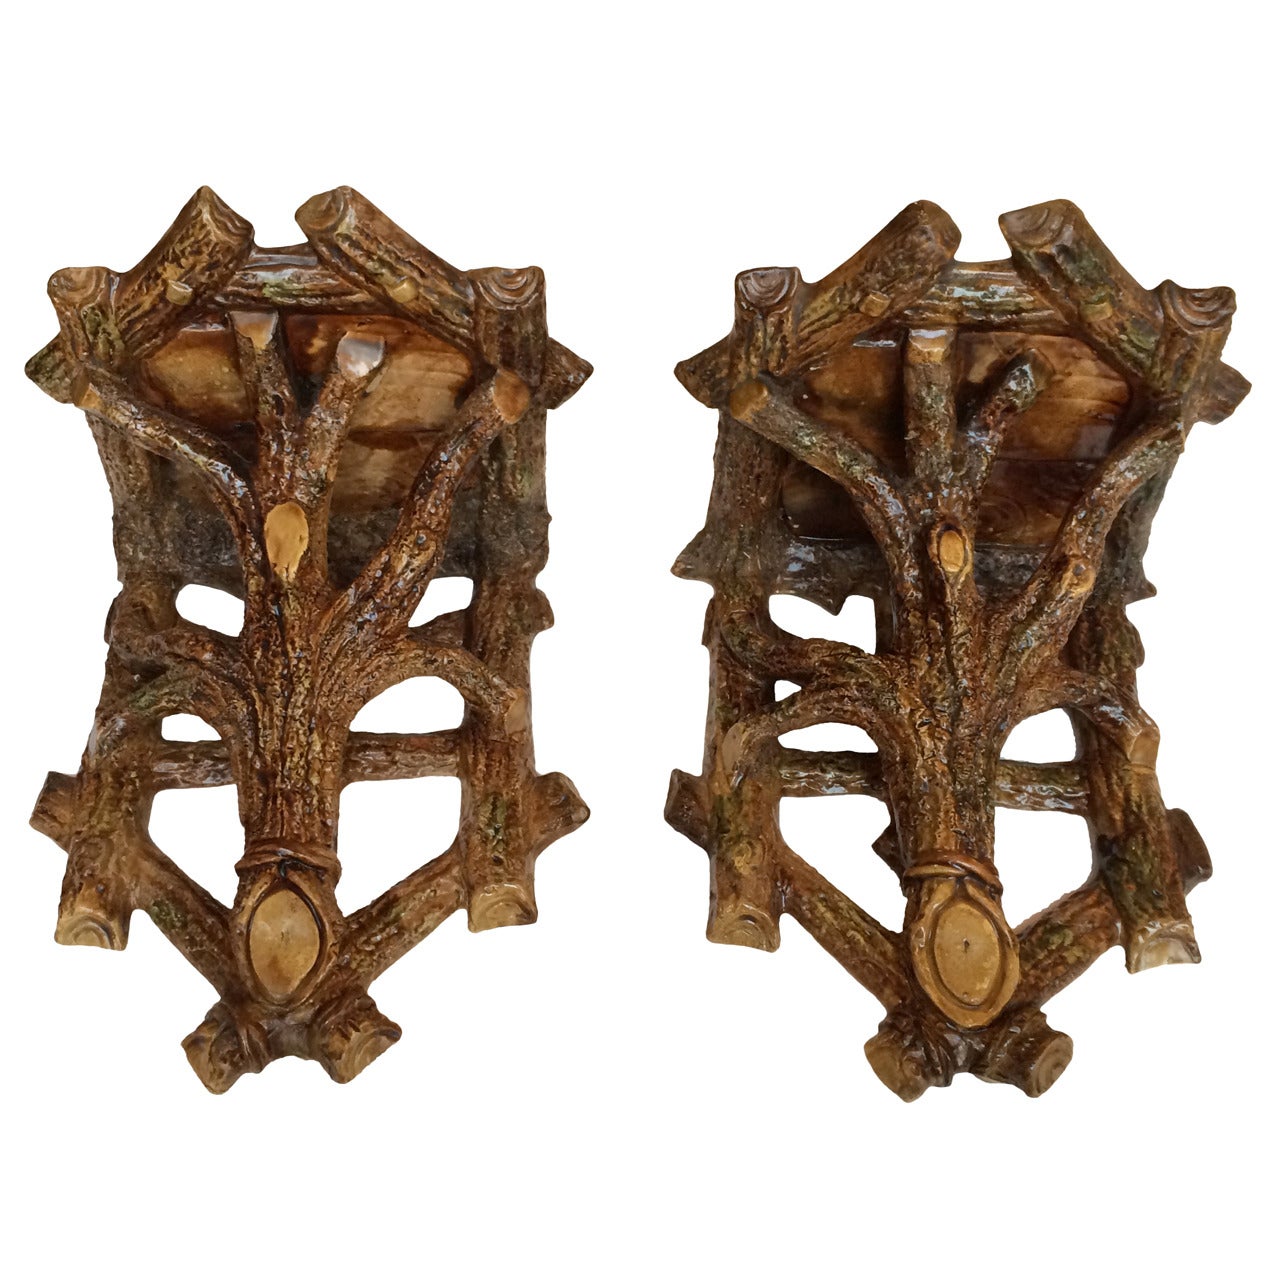 19th Century Pair of Large Glazed Ceramic Branch Form Wall Shelves For Sale